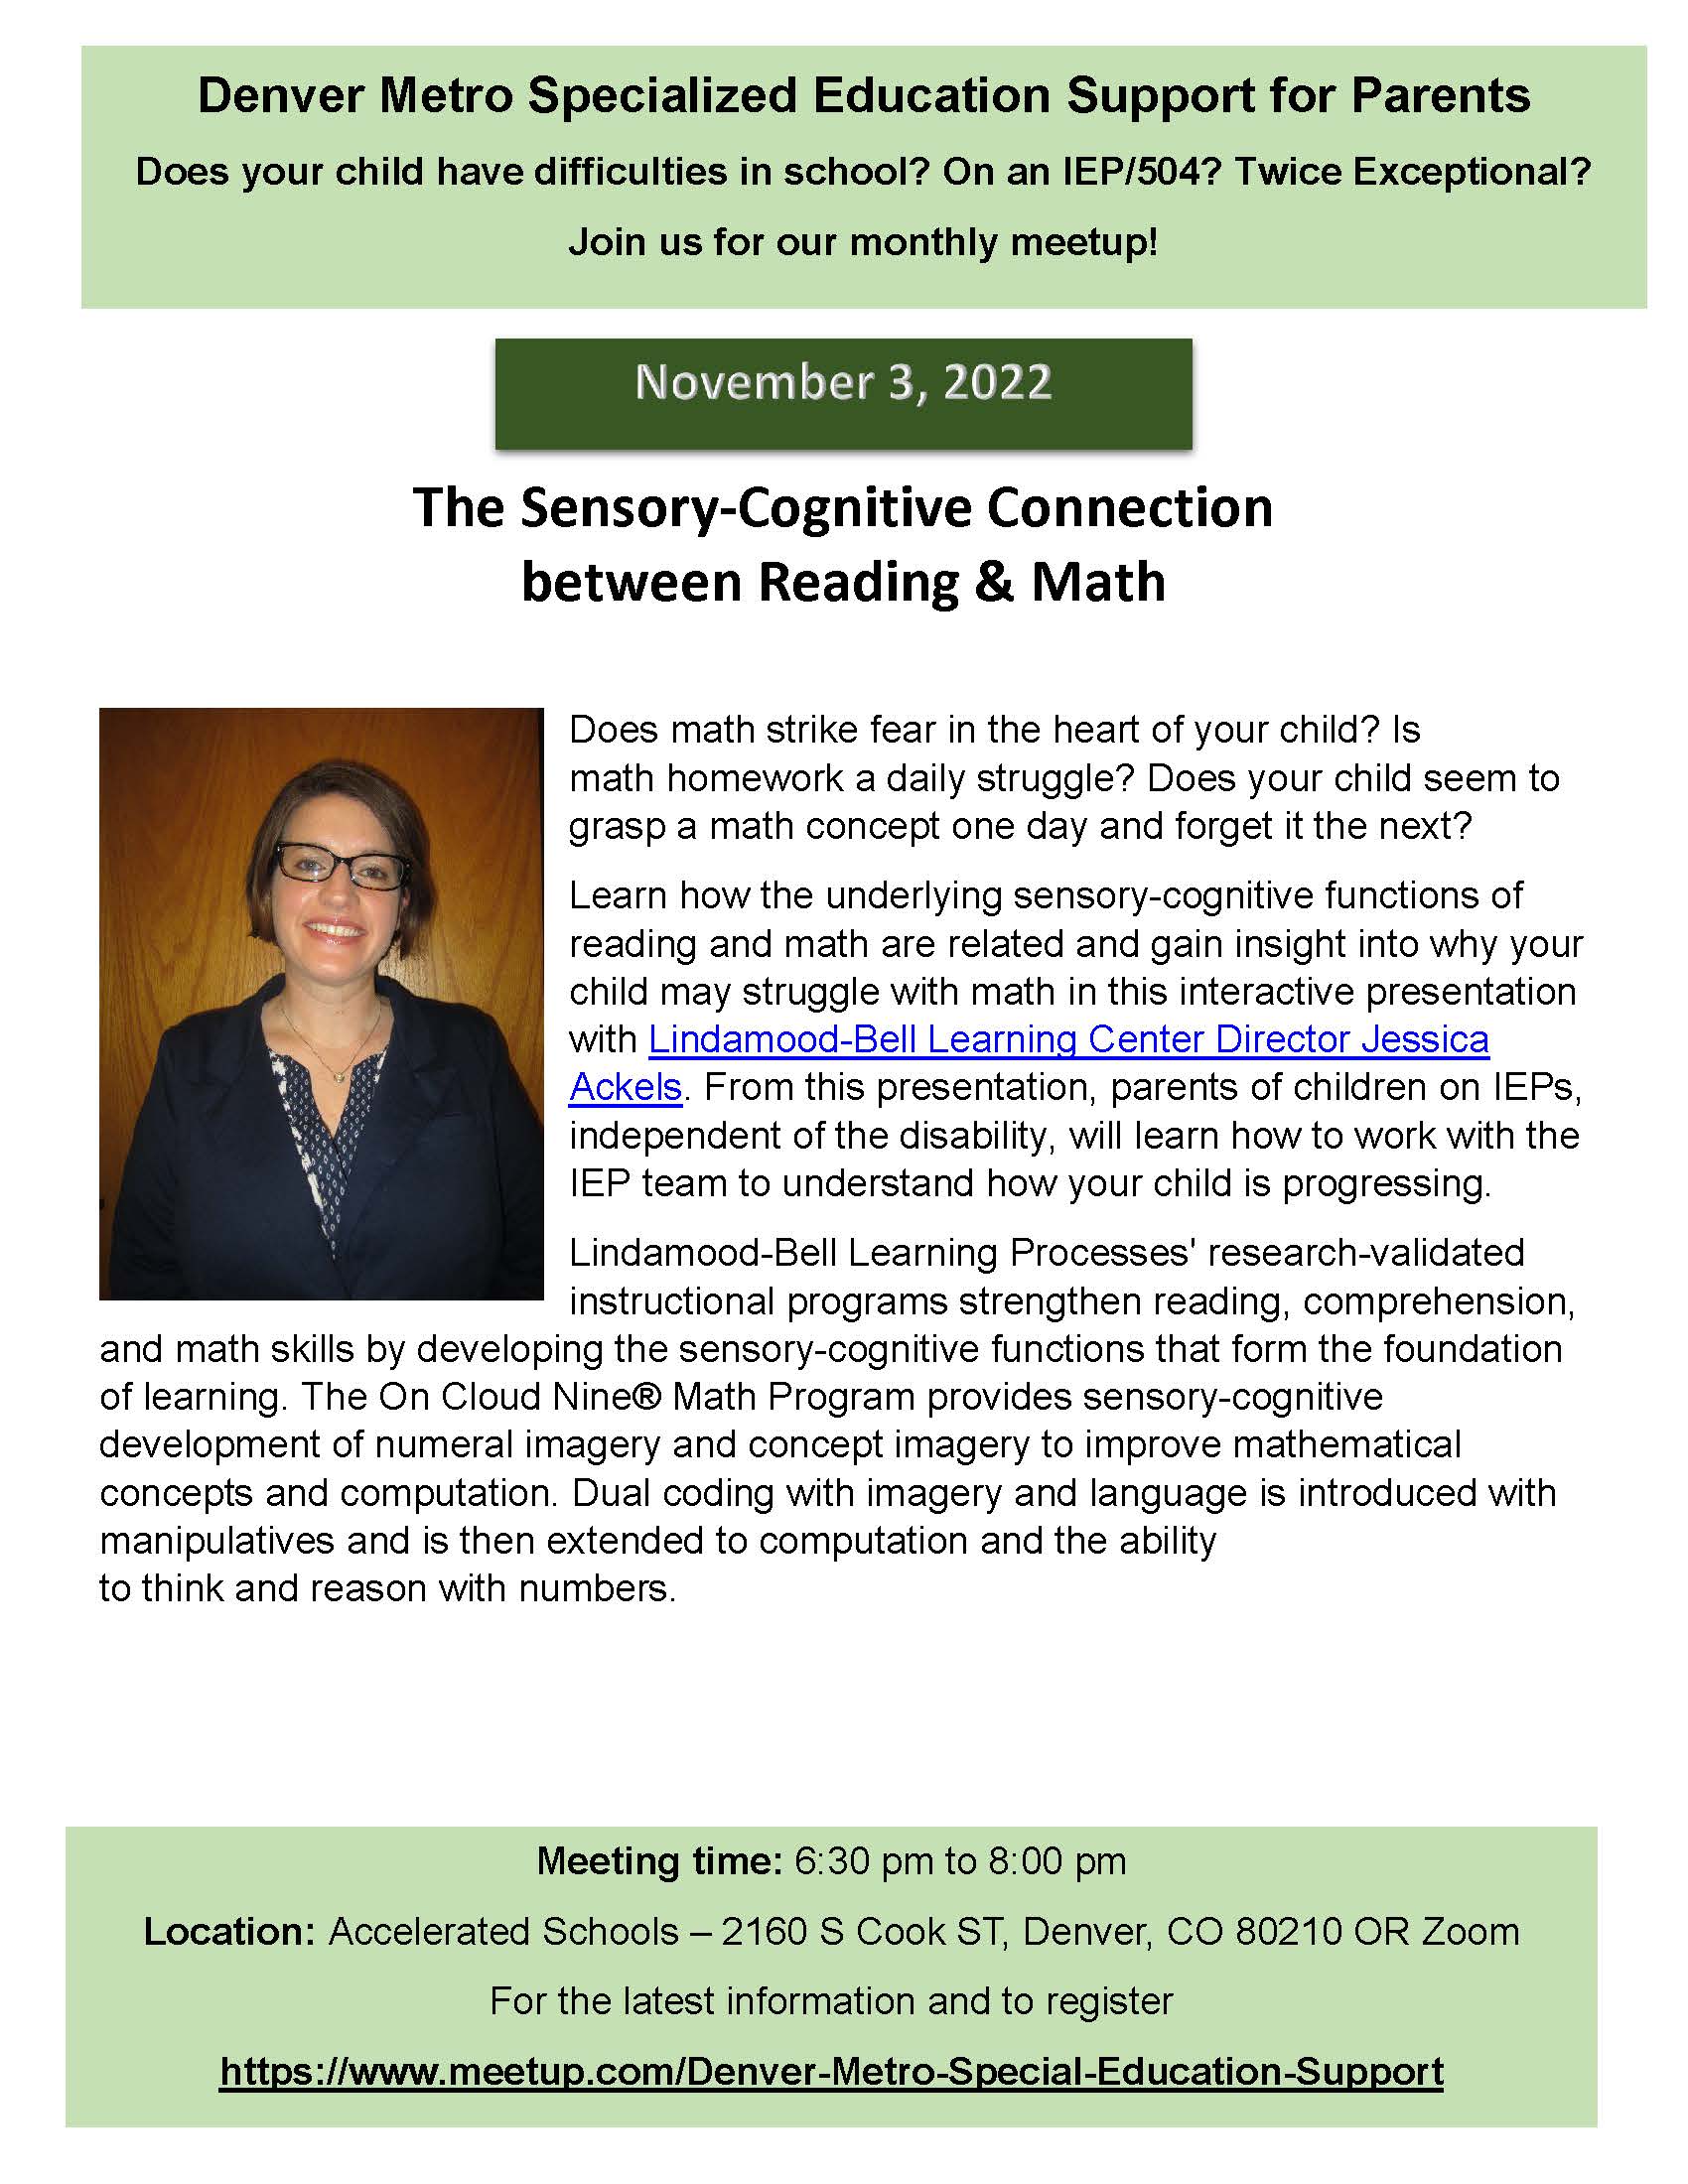 Green and white electronic poster with picture of a woman smiling in dark blue shirt for SES Flyer Reading & Math event